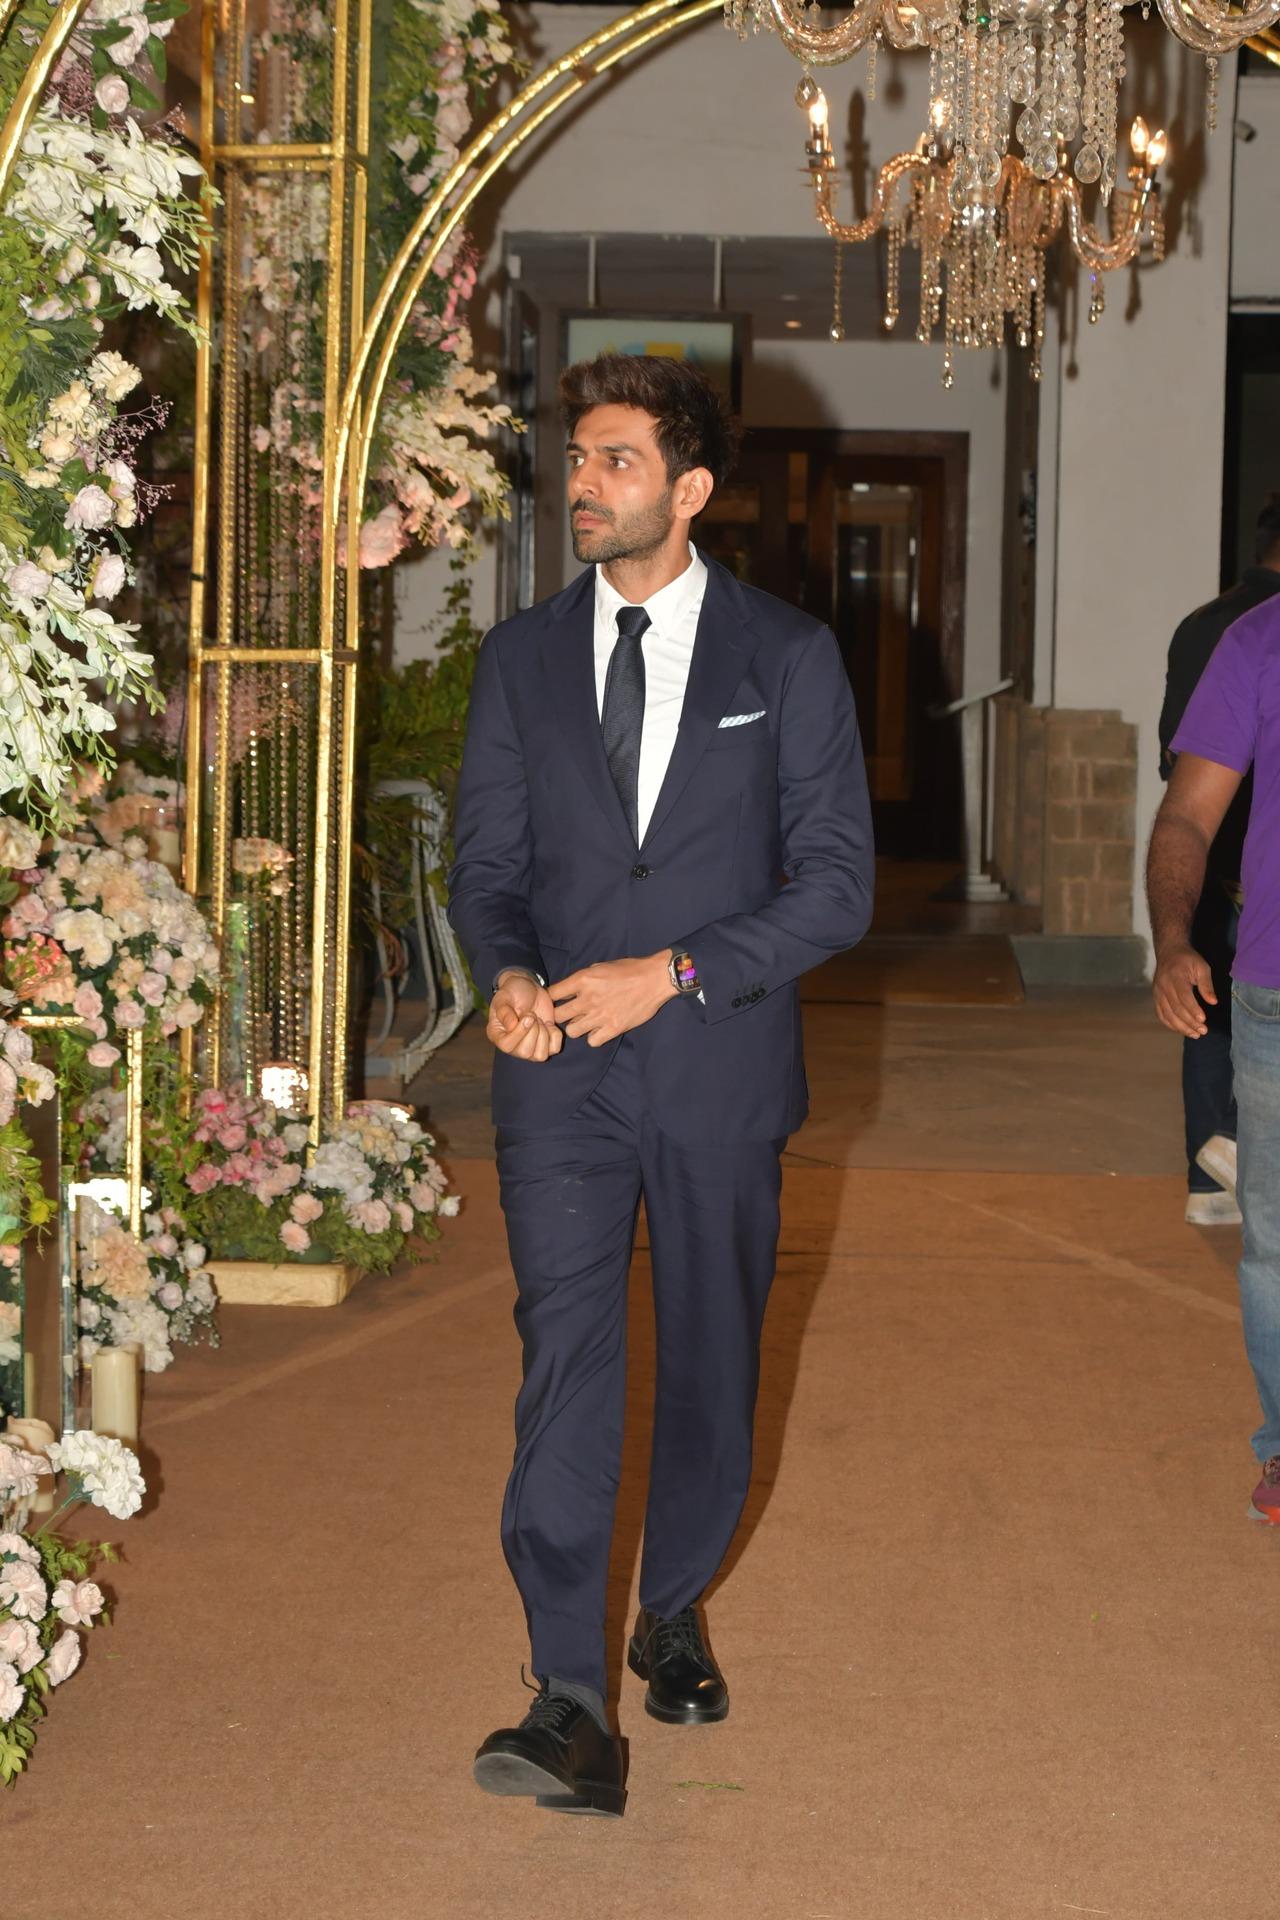 The actor posed for the paparazzi as he attended the function, looking stylish in formal wear